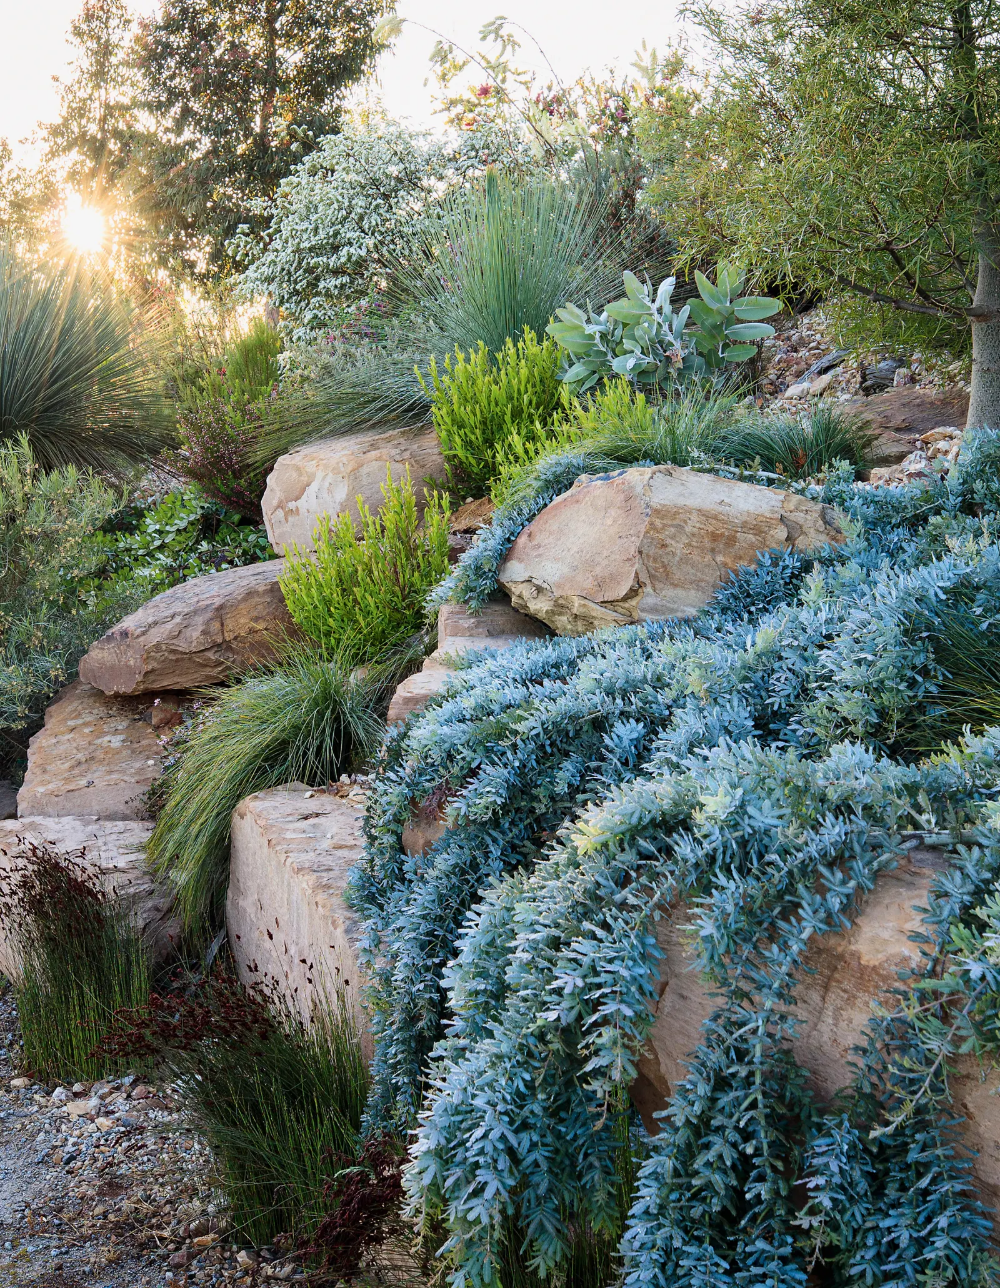 Creating a Serene Outdoor Oasis with Stones in Your Garden Design